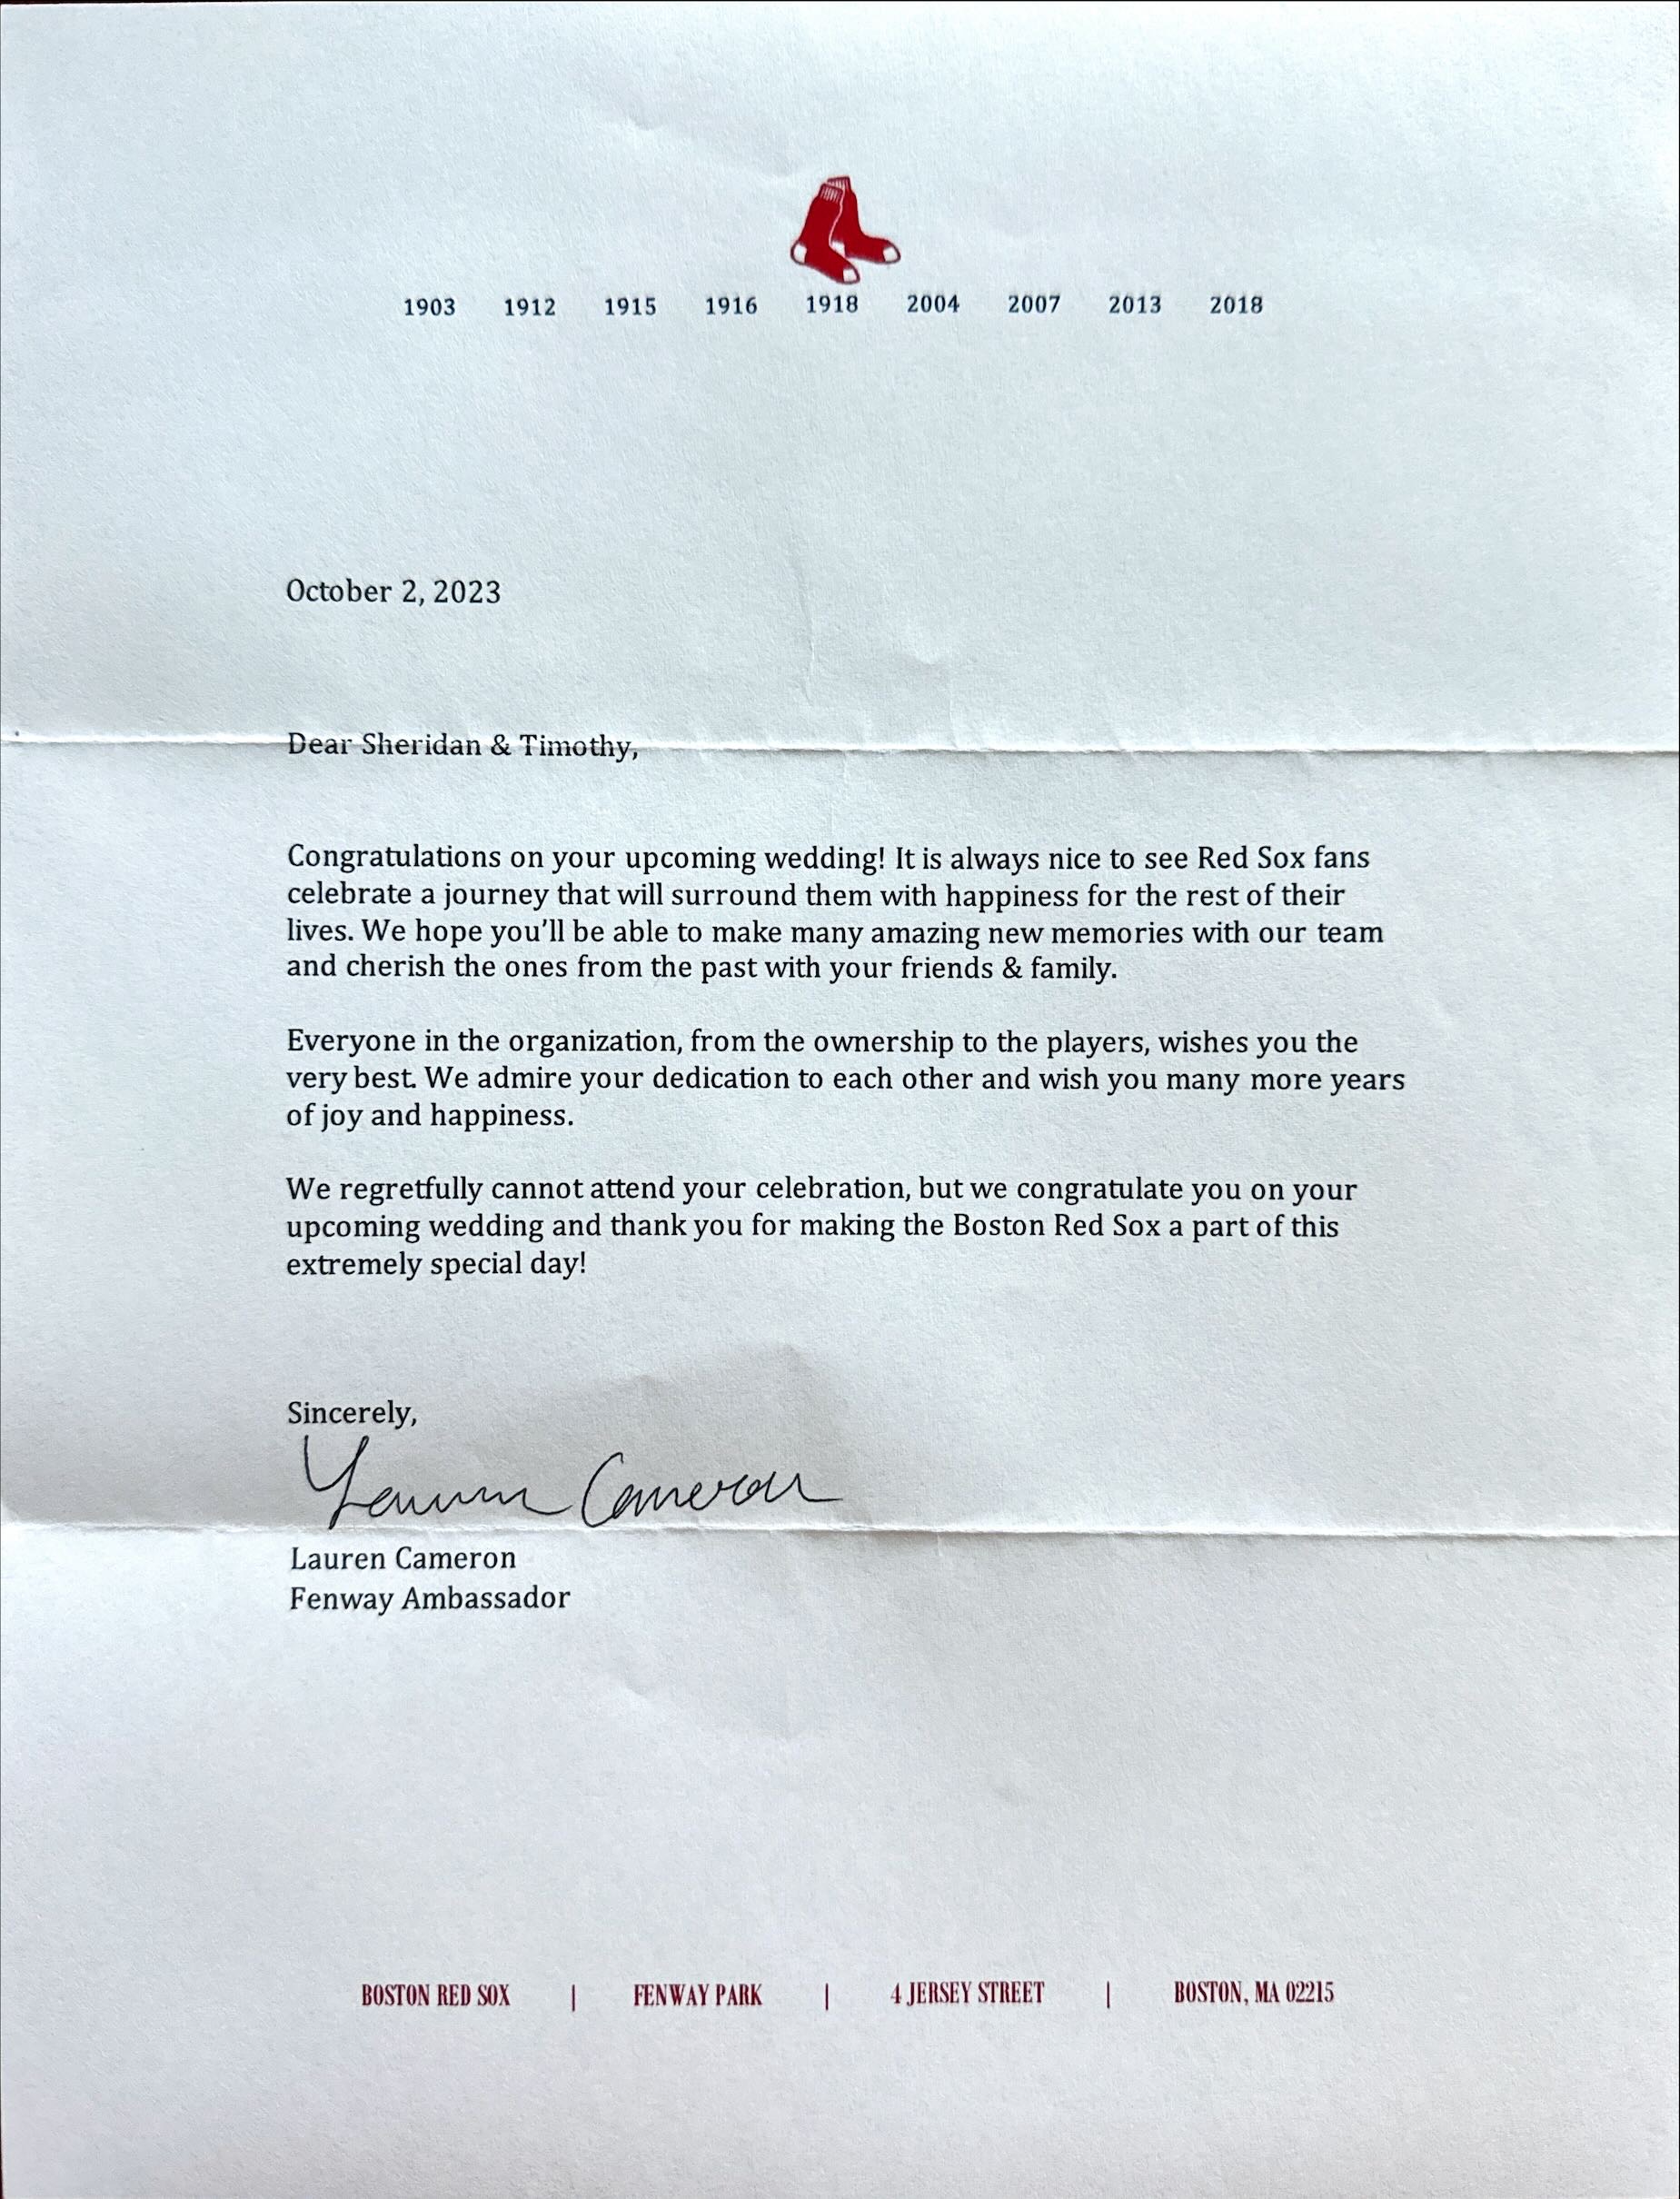 Boston Red Sox Letter